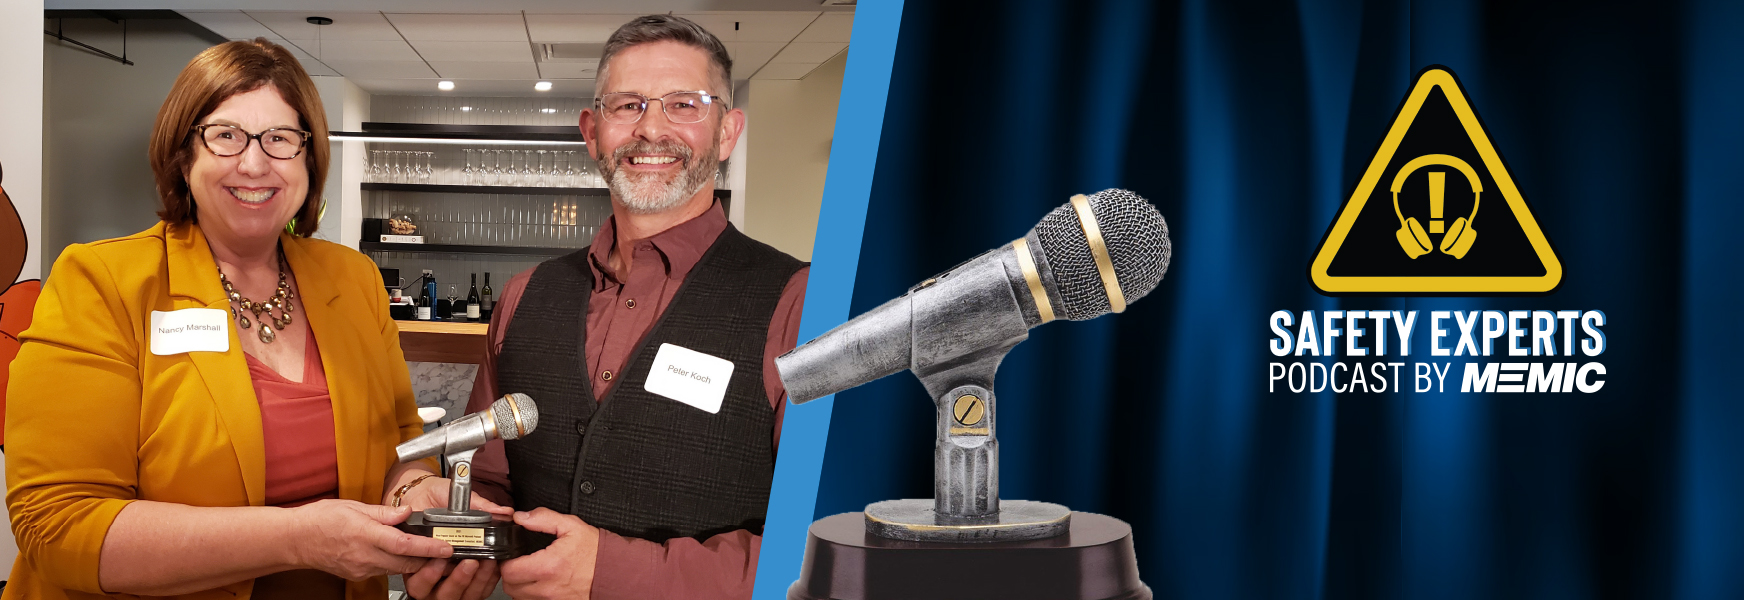 Peter Koch accepting Golden Microphone award from Nancy Marshall of The PR Maven® podcast